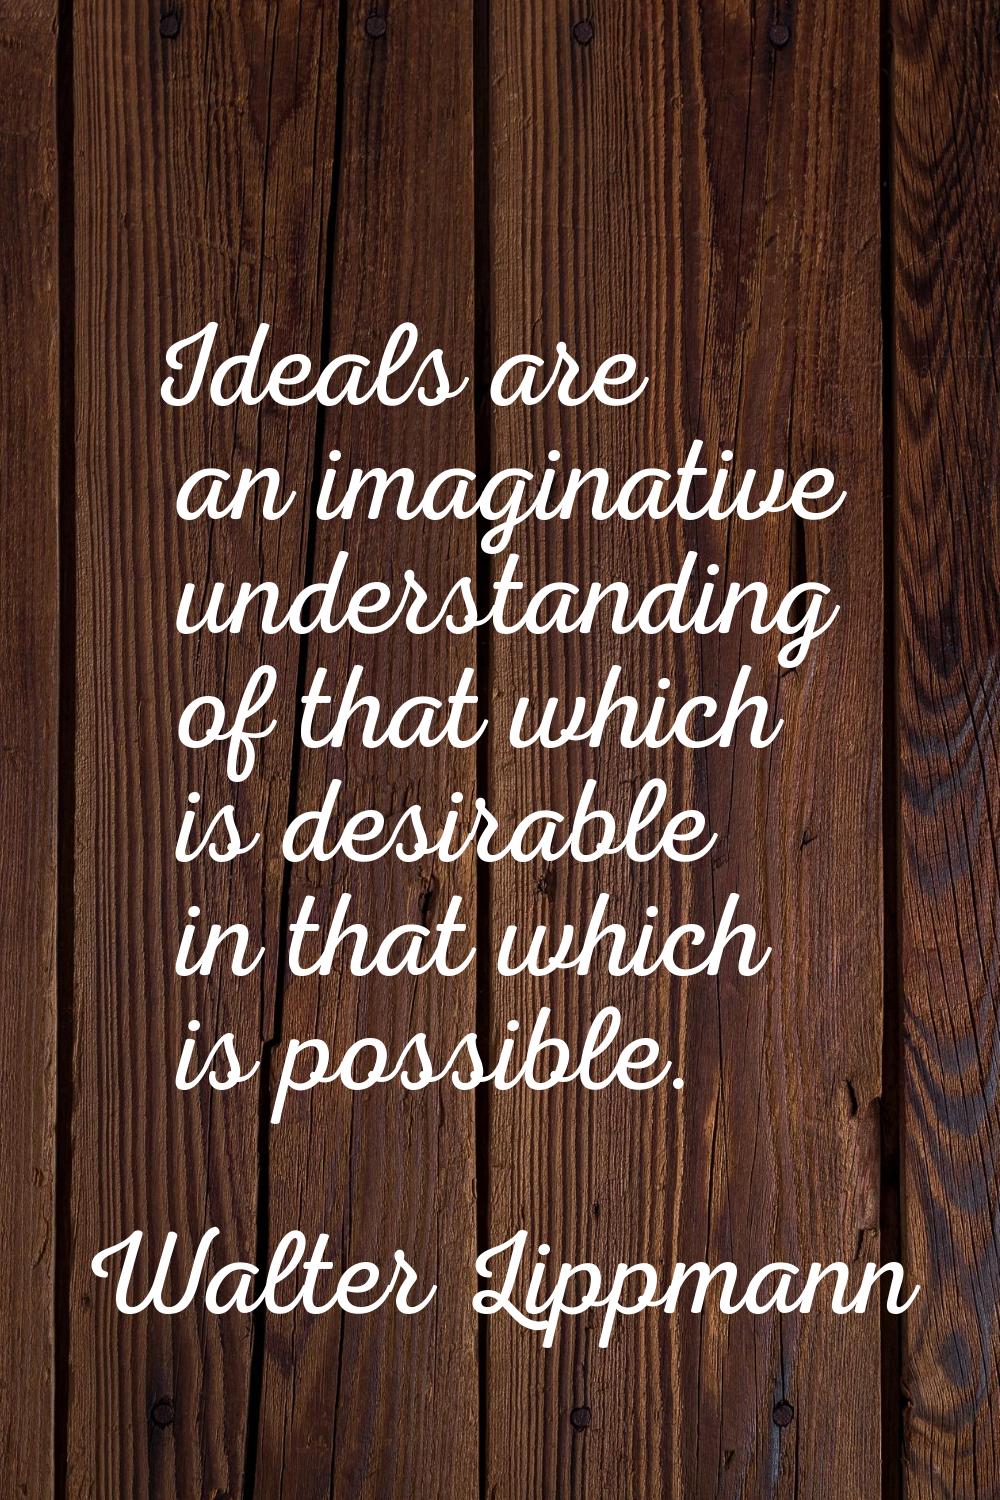 Ideals are an imaginative understanding of that which is desirable in that which is possible.